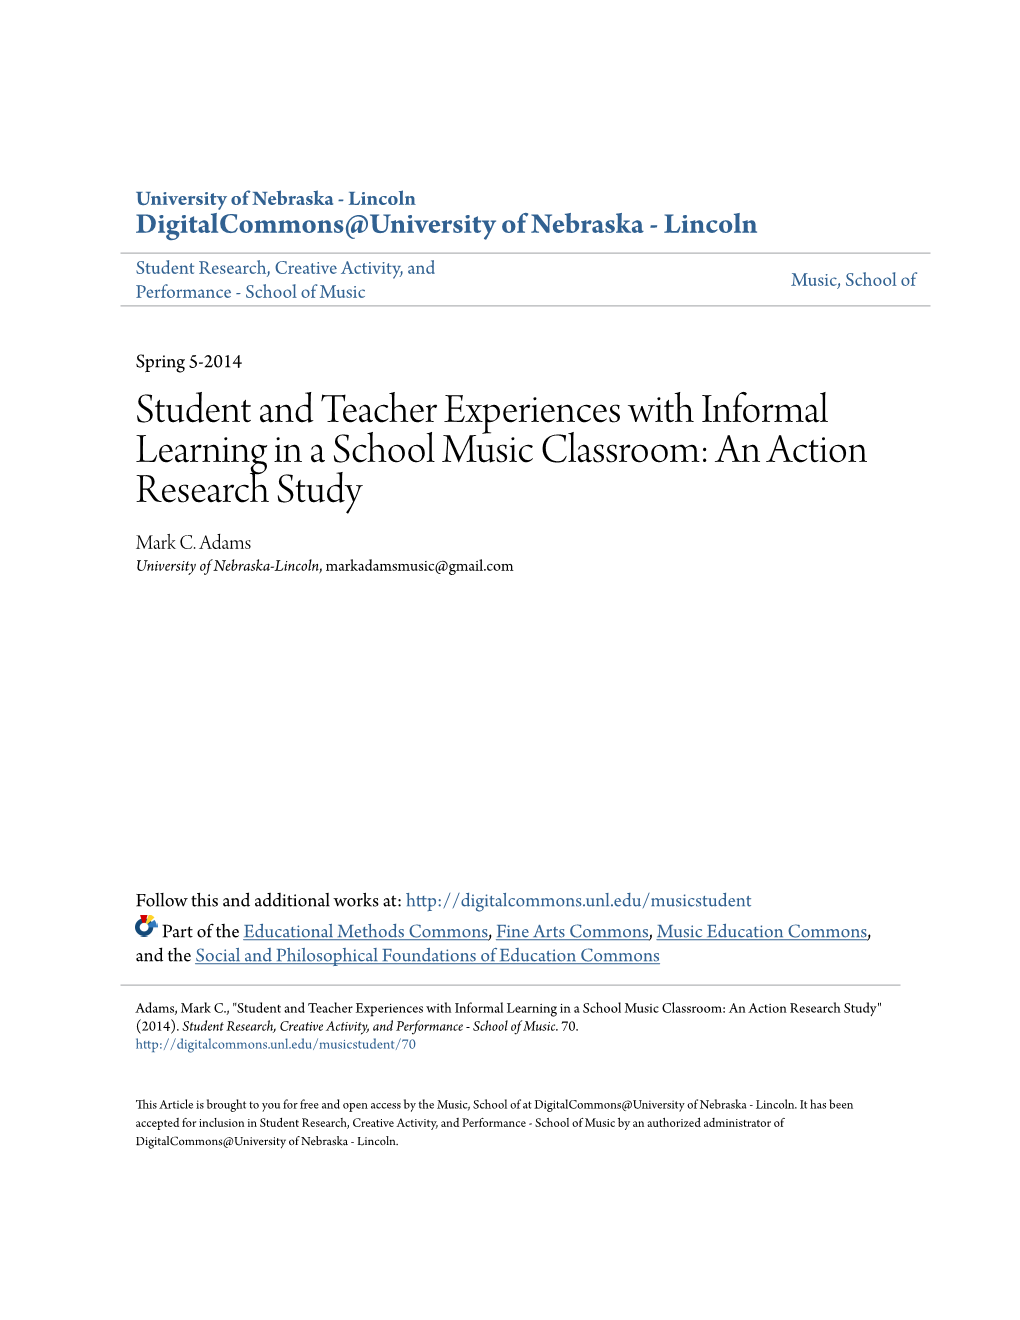 Student and Teacher Experiences with Informal Learning in a School Music Classroom: an Action Research Study Mark C